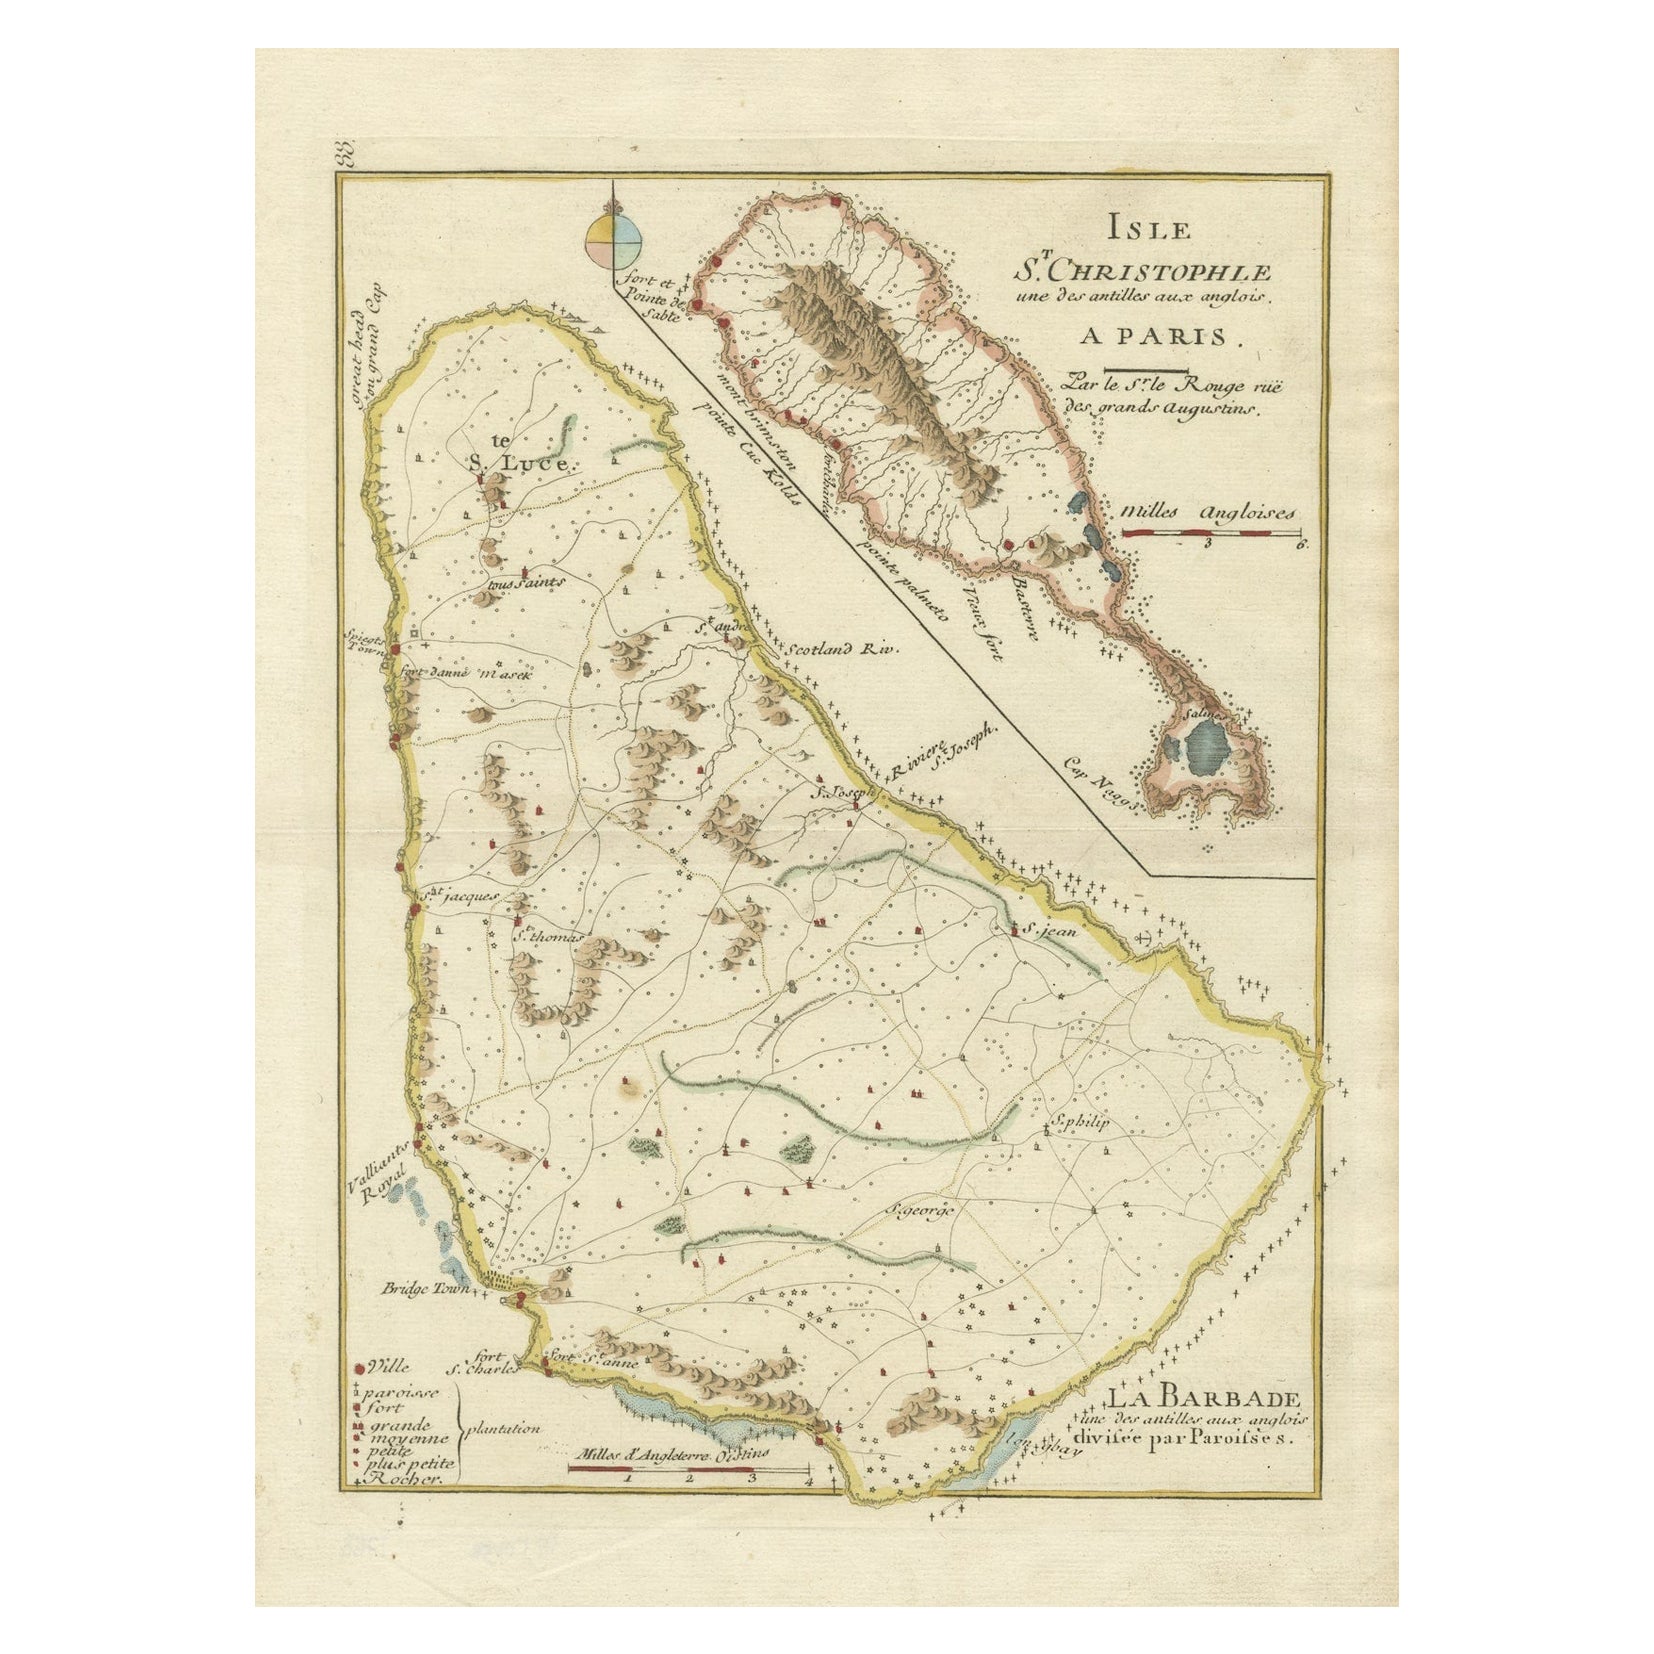 Barados and St Christopher or St Kitts and Nevis Islands in the Caribbean, 1748